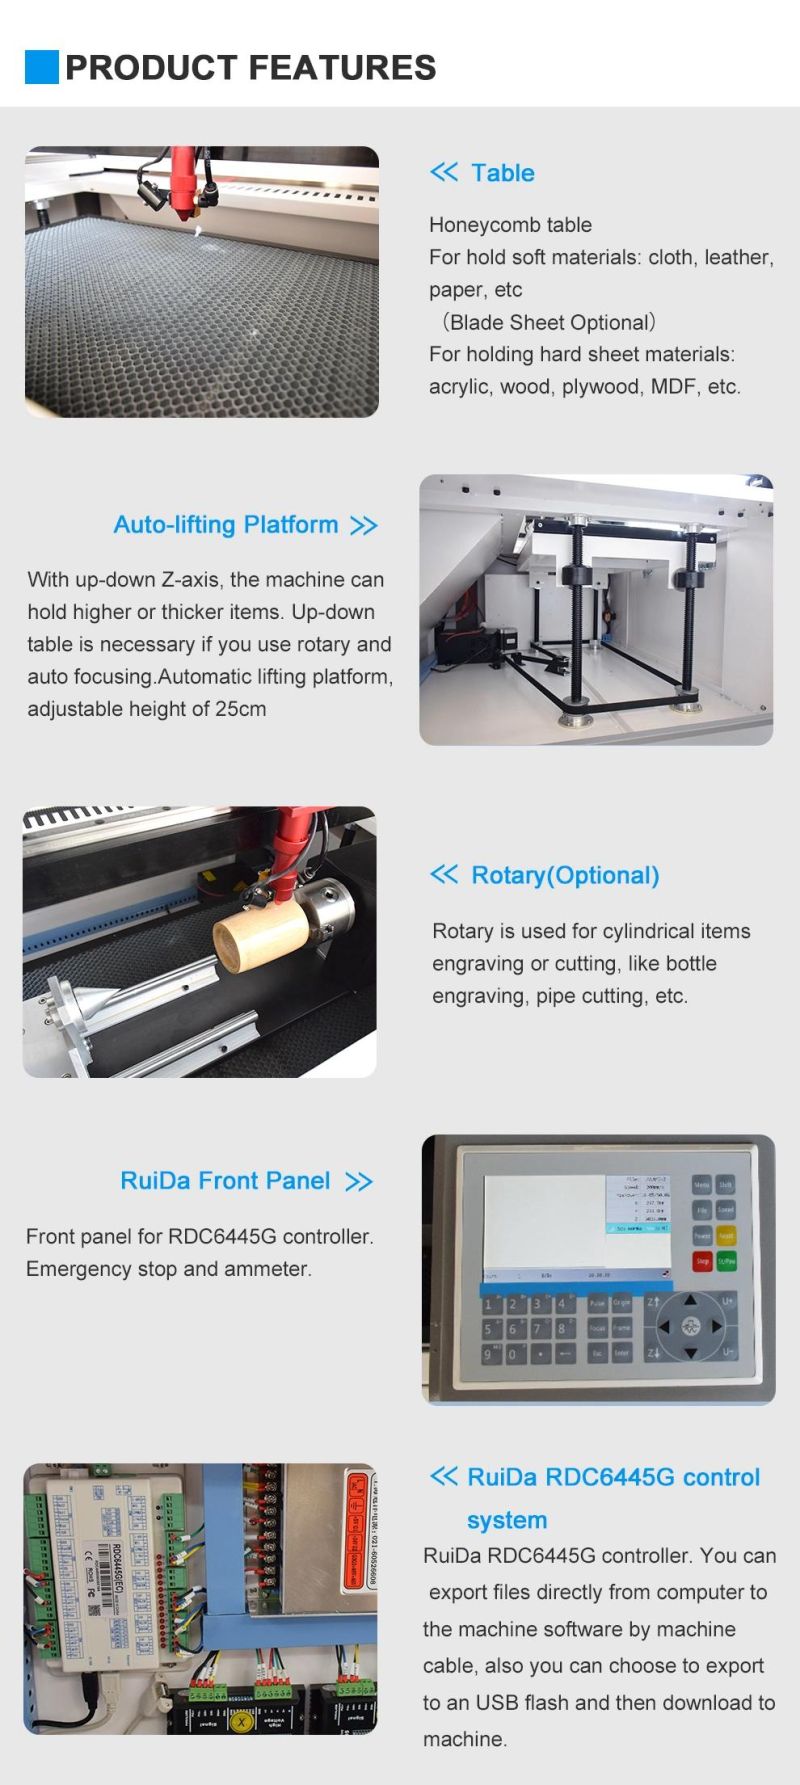 Laser Engraving Machine Wood Acrylic Plastic Glass Cutter Engraver 600*400mm